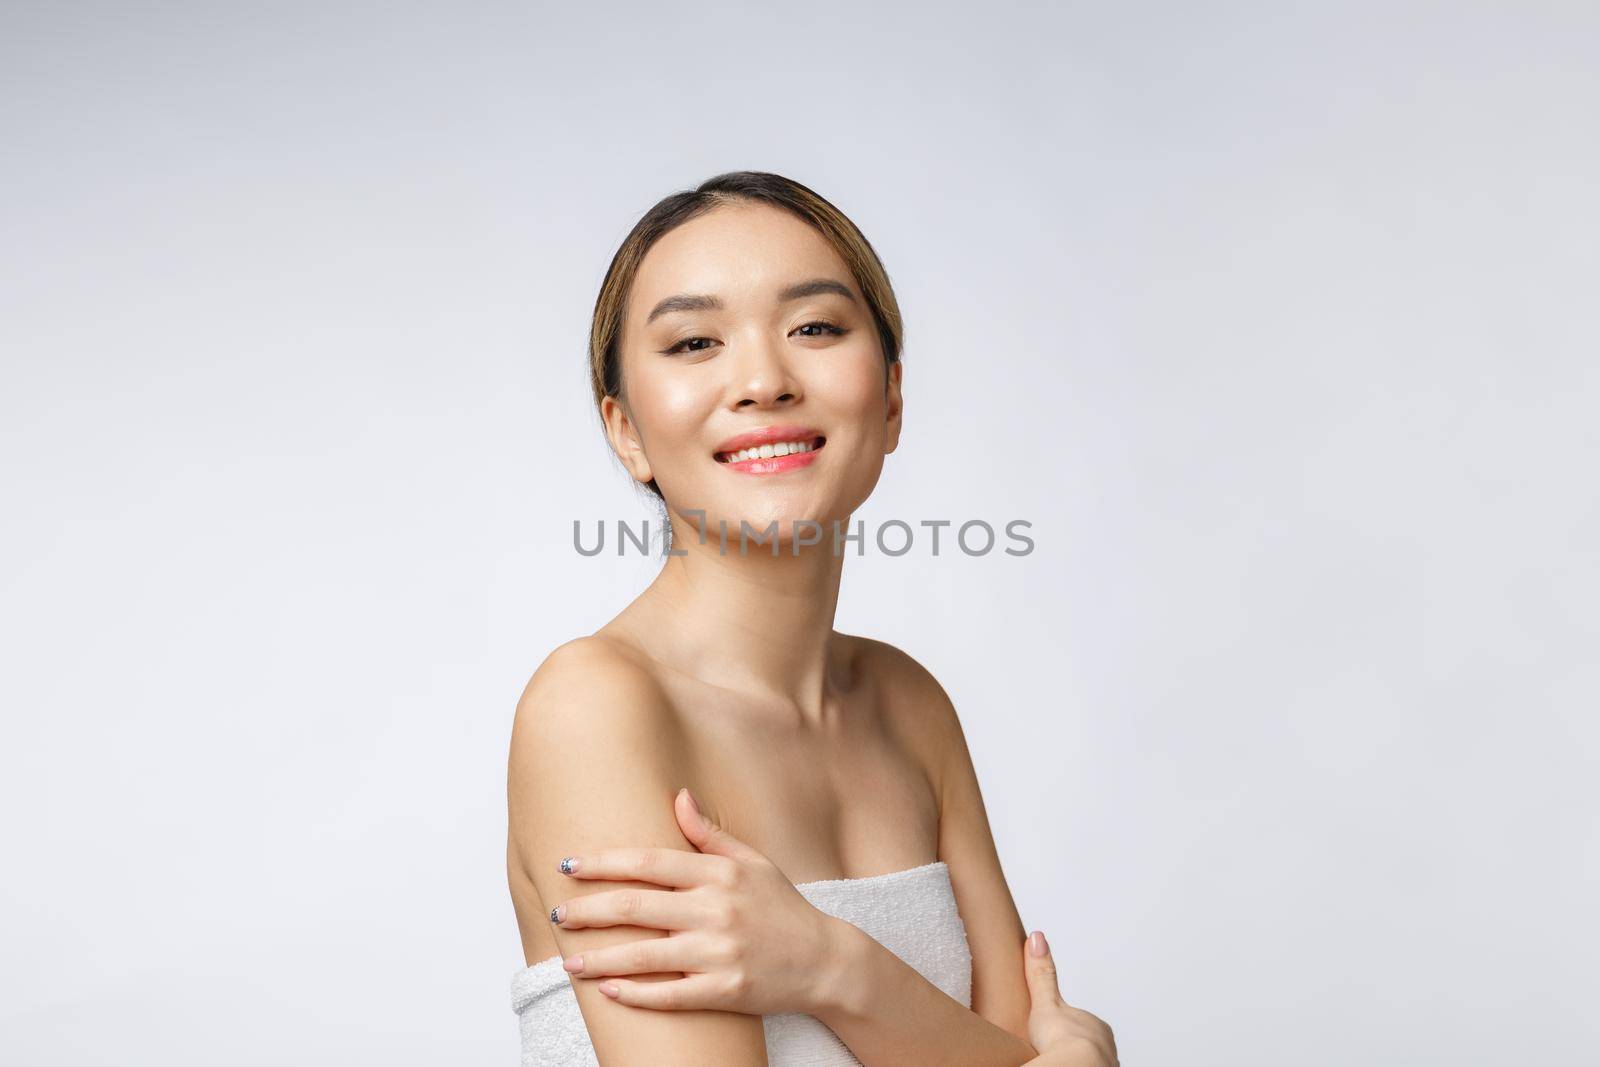 Sided portrait of Asian beautiful smiling girl with short hair showing her healthy skin on the isolated white background.